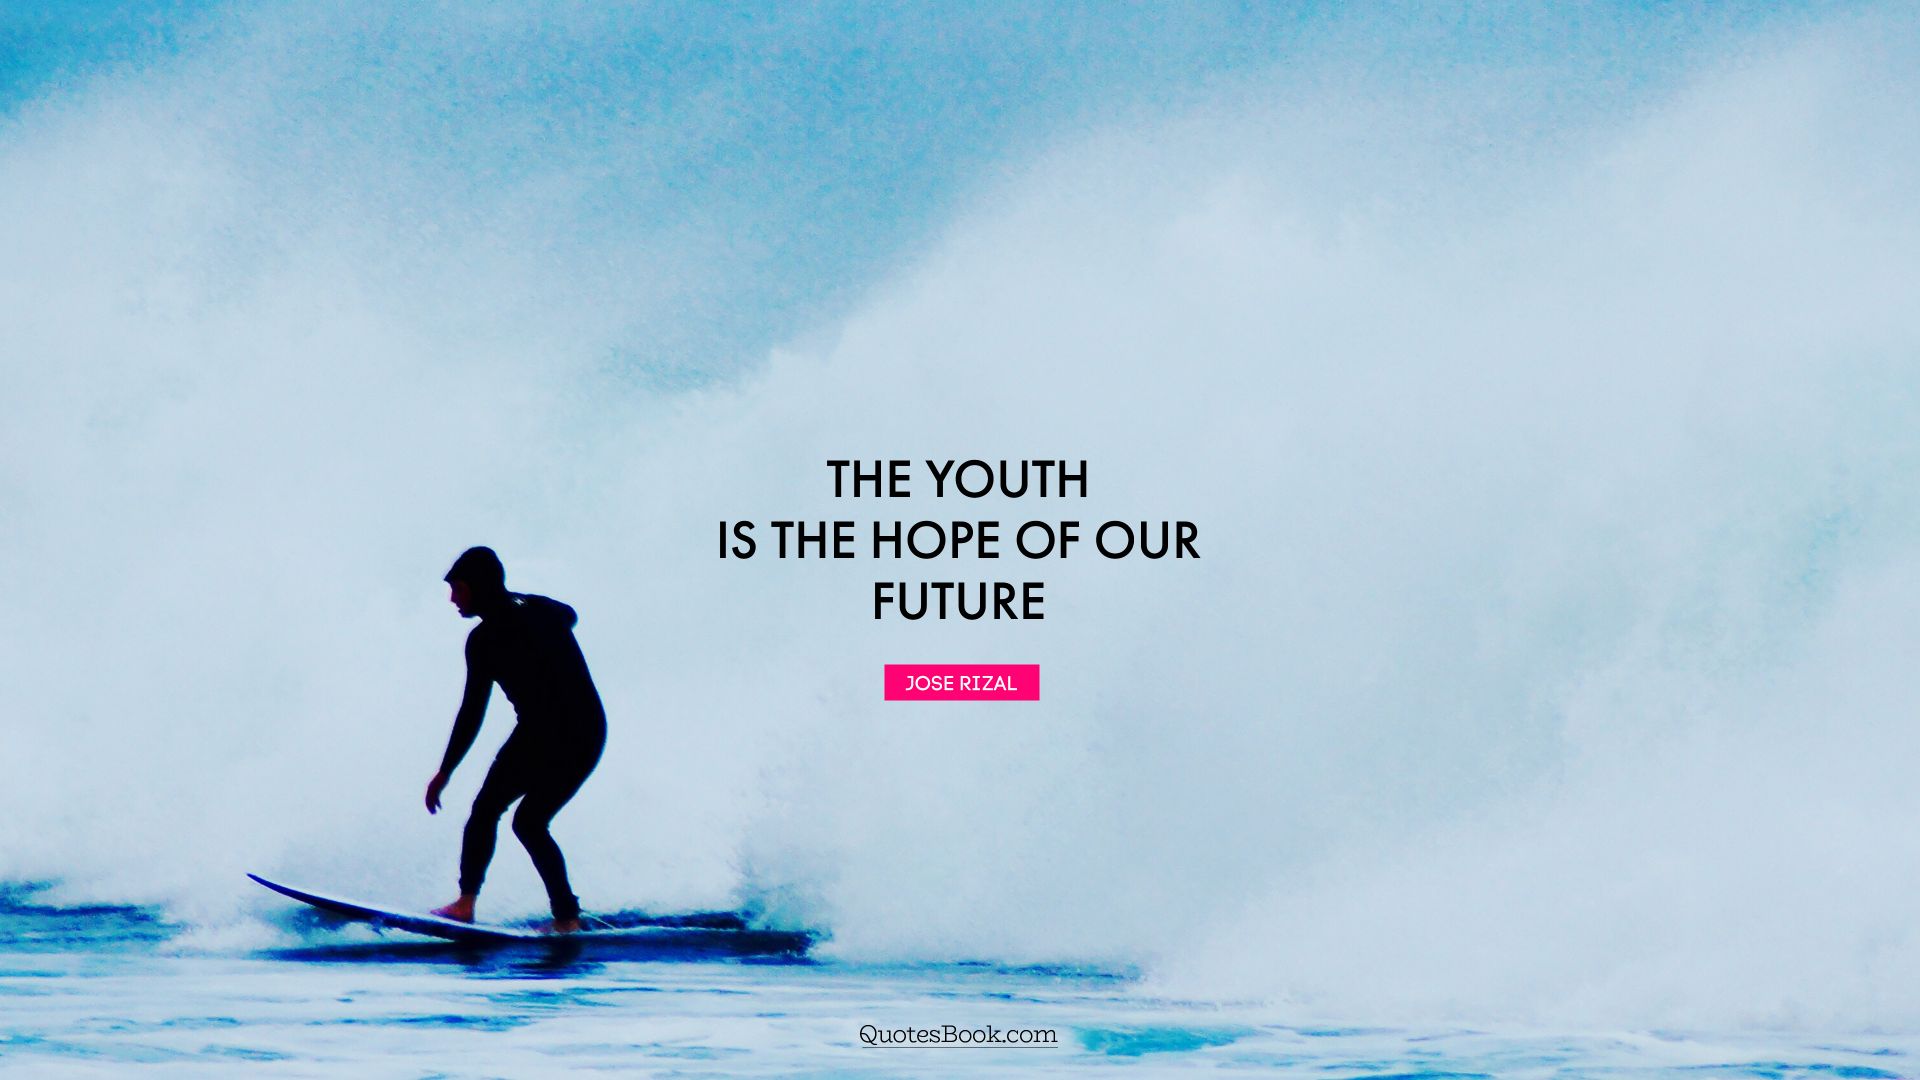 The youth is the hope of our future. - Quote by Jose Rizal